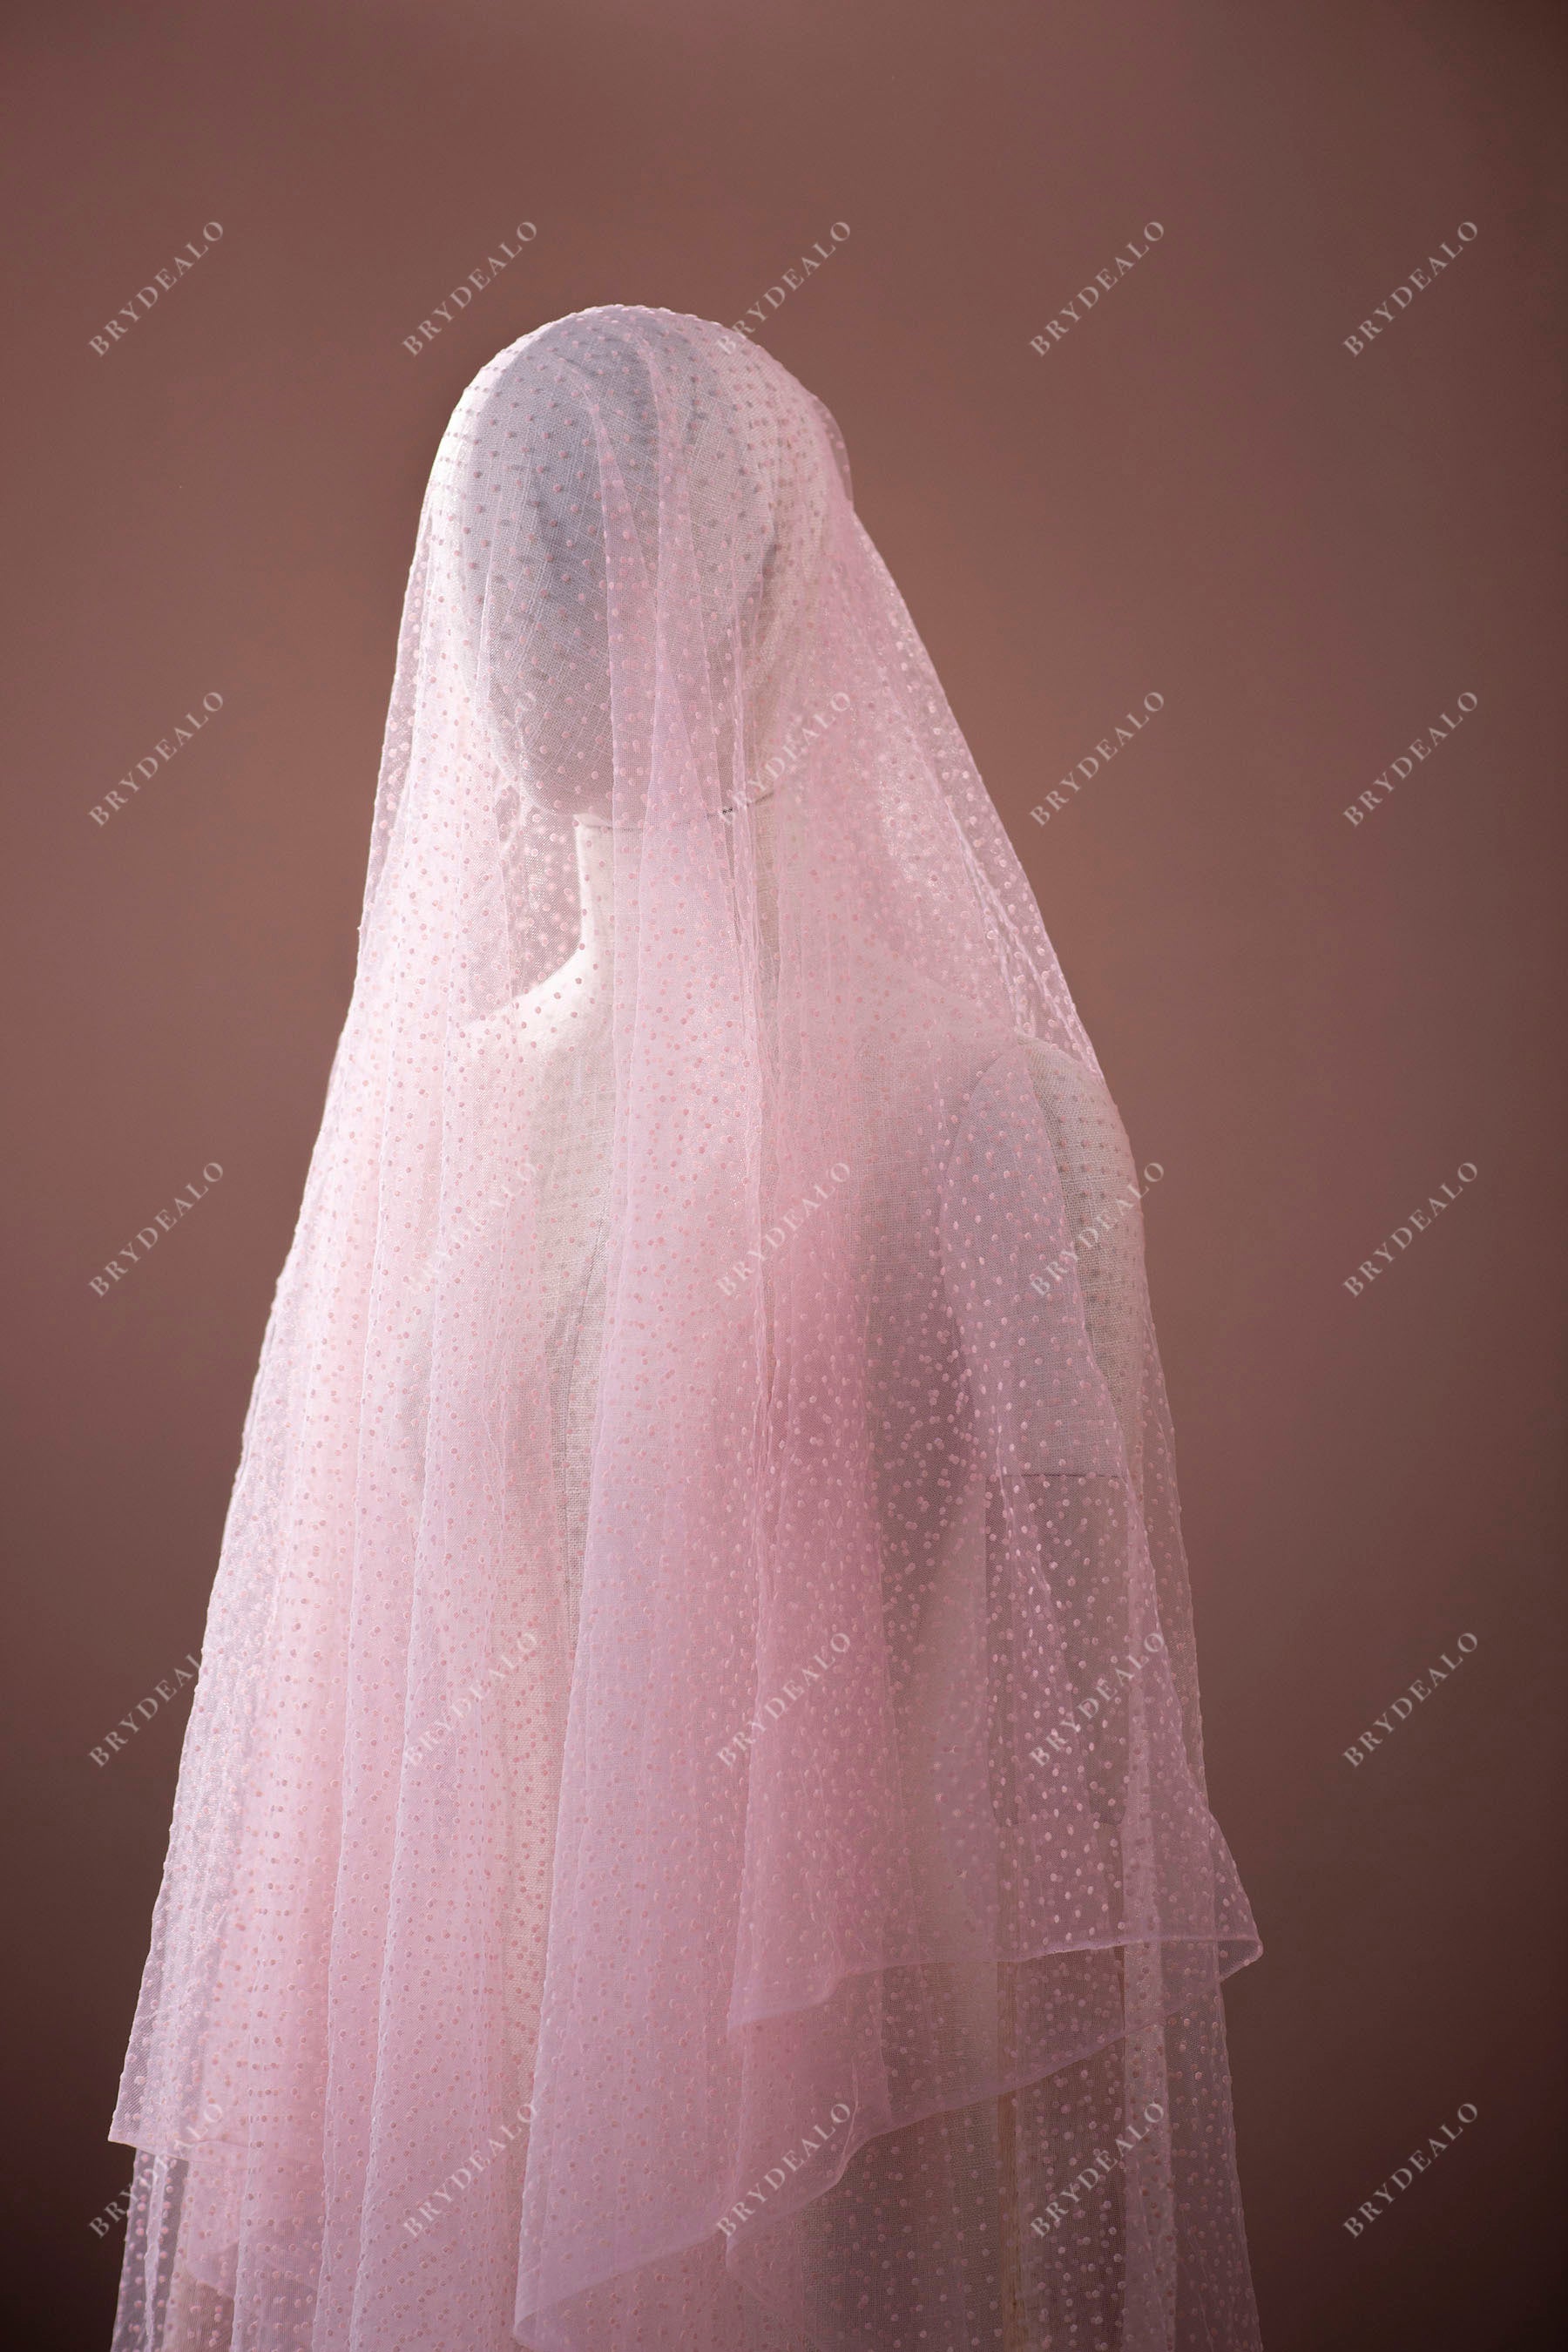 Best Pink Polka Dot Mesh Lace Fabric for Sale